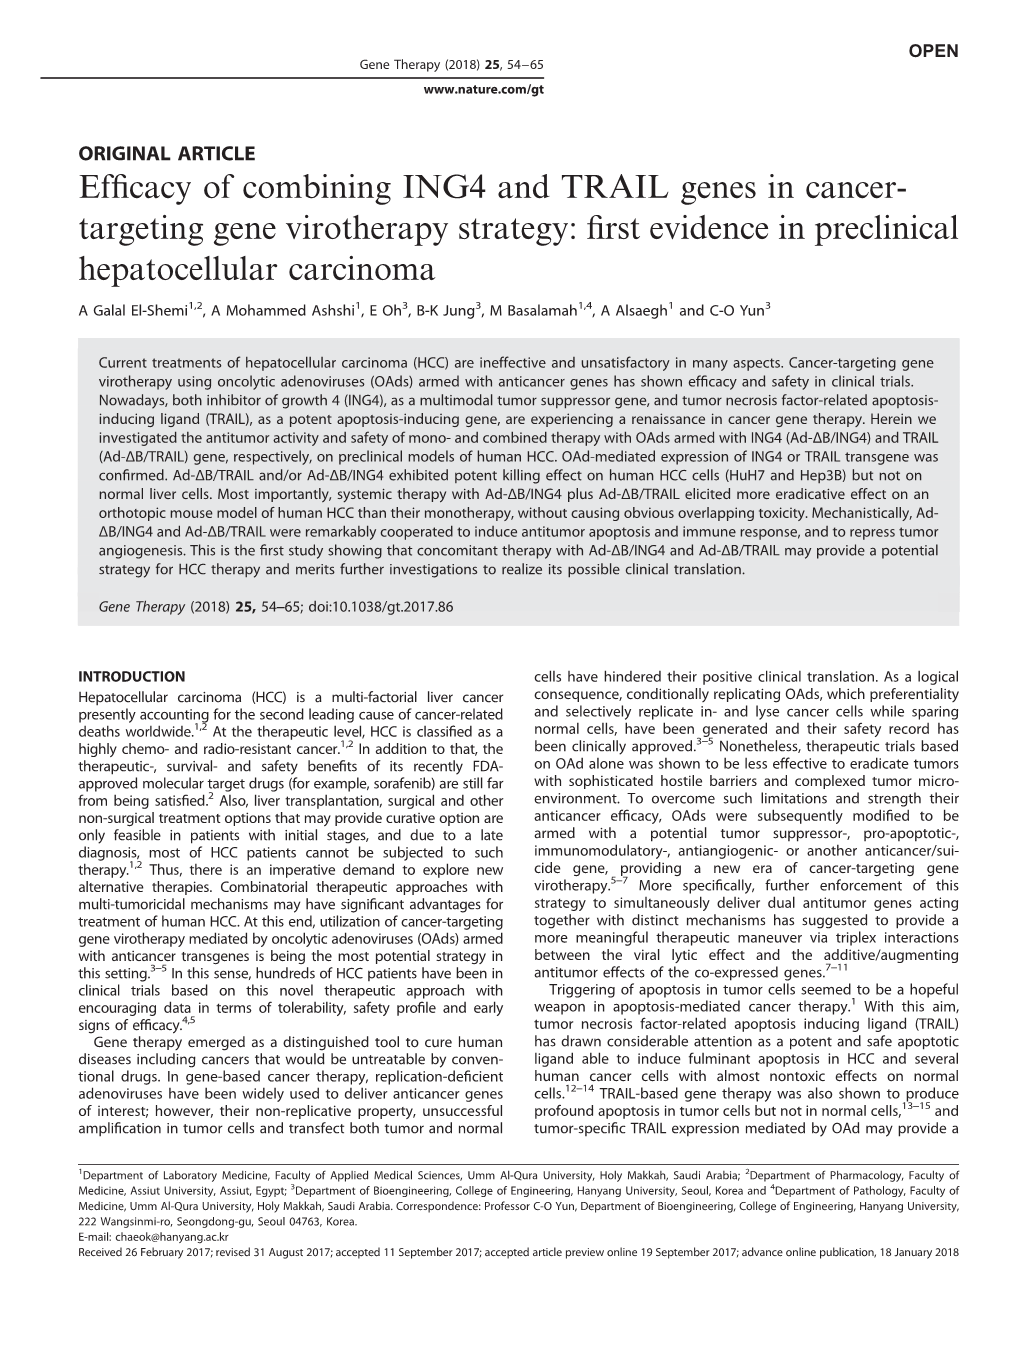 Efficacy of Combining ING4 and TRAIL Genes In